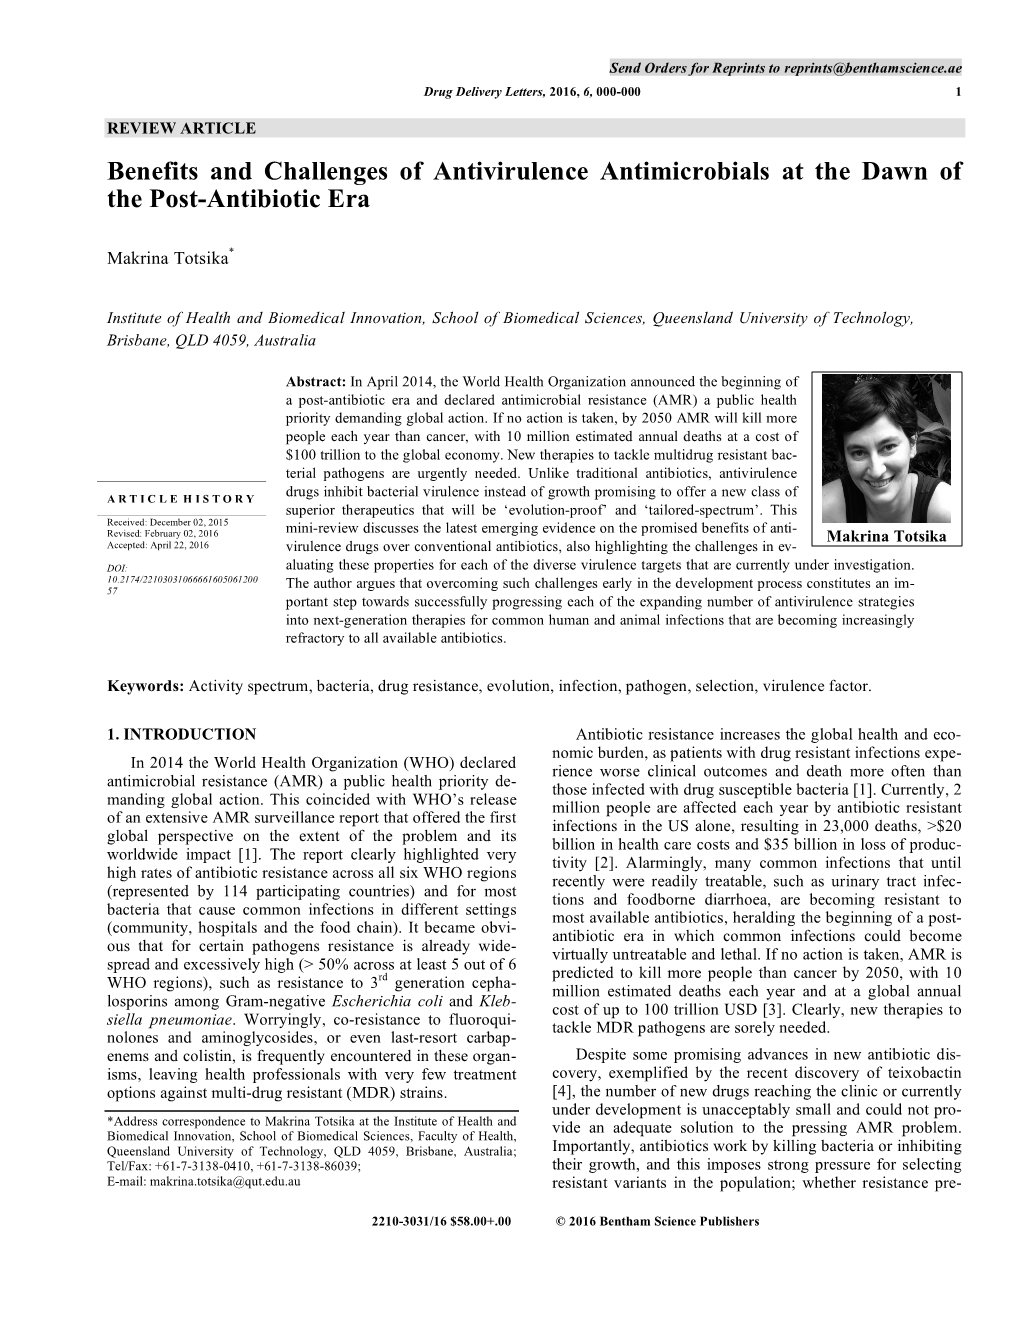 Benefits and Challenges of Antivirulence Antimicrobials at the Dawn of the Post-Antibiotic Era